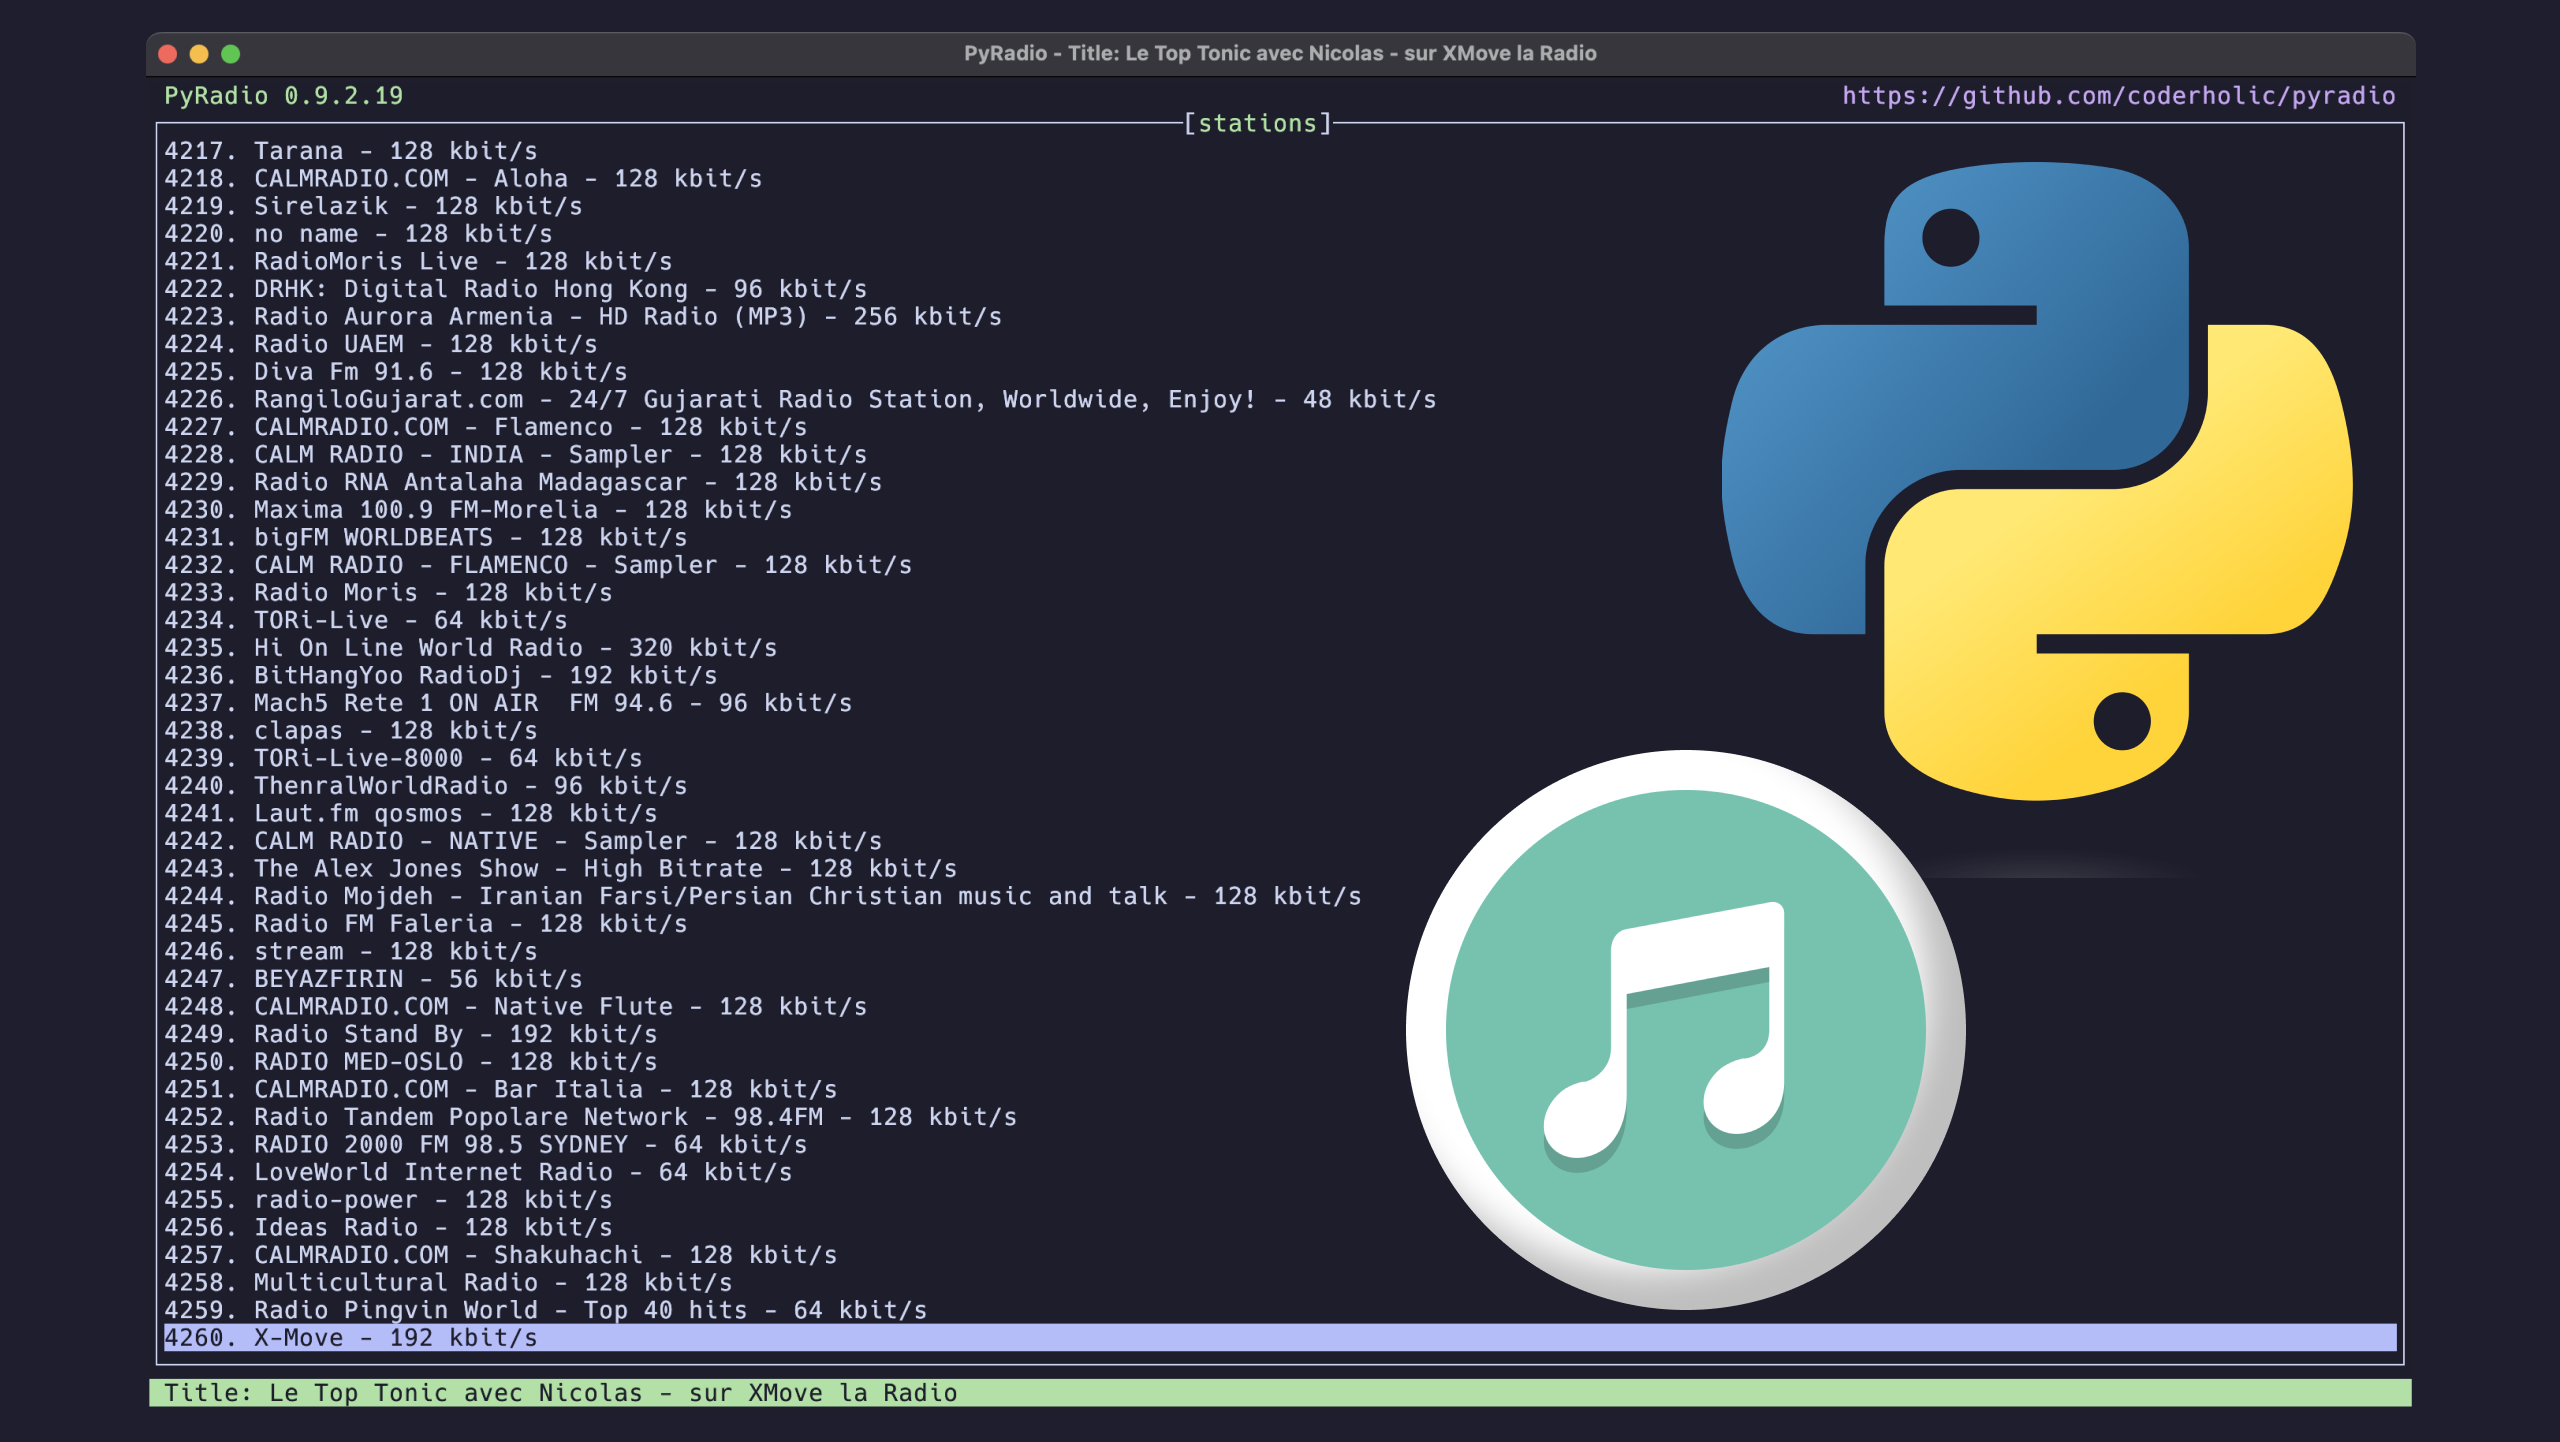 Cover Image for Spicing Up Your PyRadio: Easy Peasy Online Radio Playlists Integration